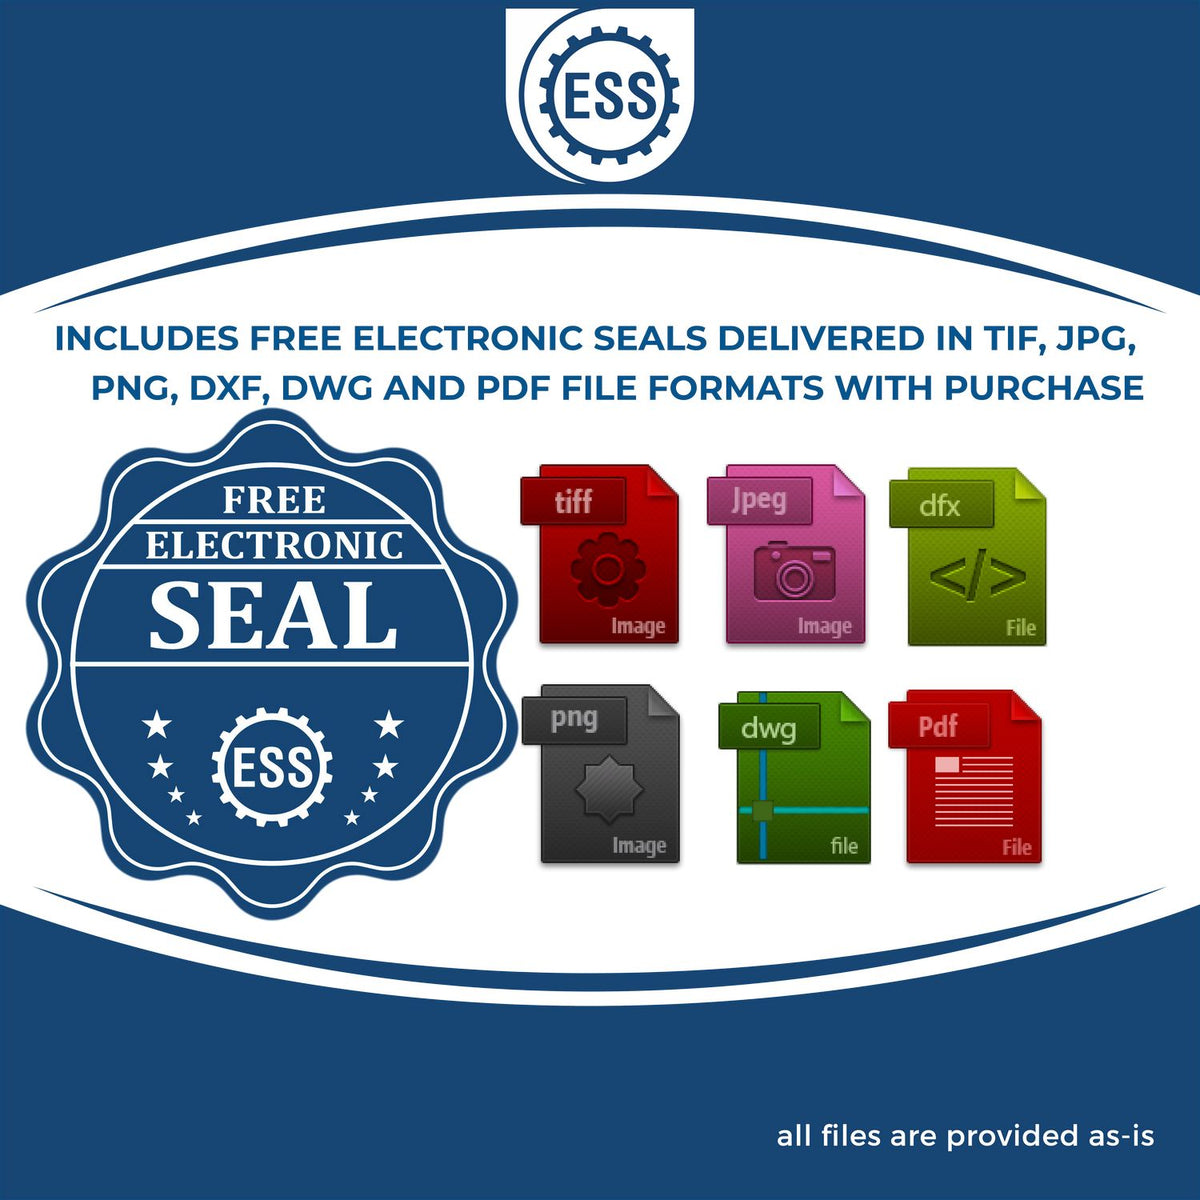 An infographic for the free electronic seal for the Slim Pre-Inked Arizona Landscape Architect Seal Stamp illustrating the different file type icons such as DXF, DWG, TIF, JPG and PNG.